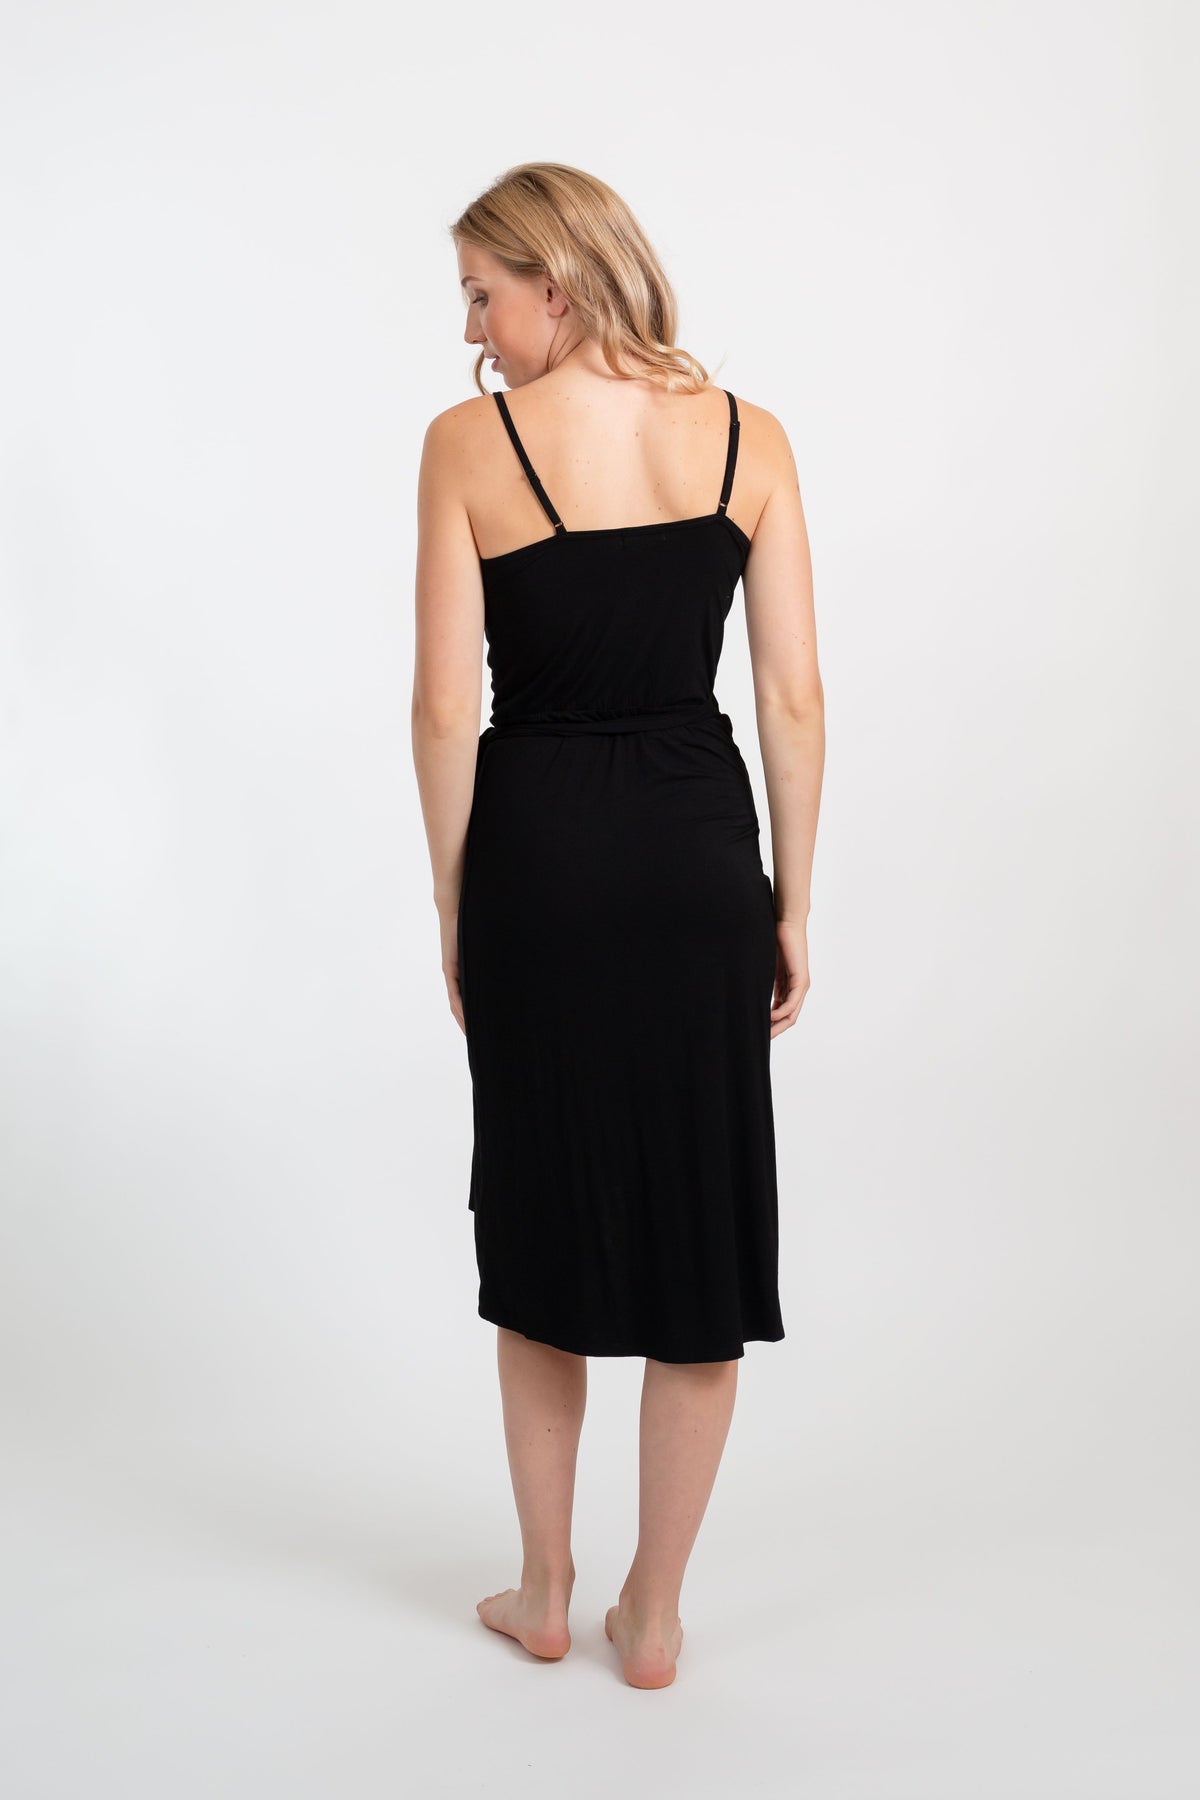 the back of a blonde hair female model wearing a black thin strap dress looking down